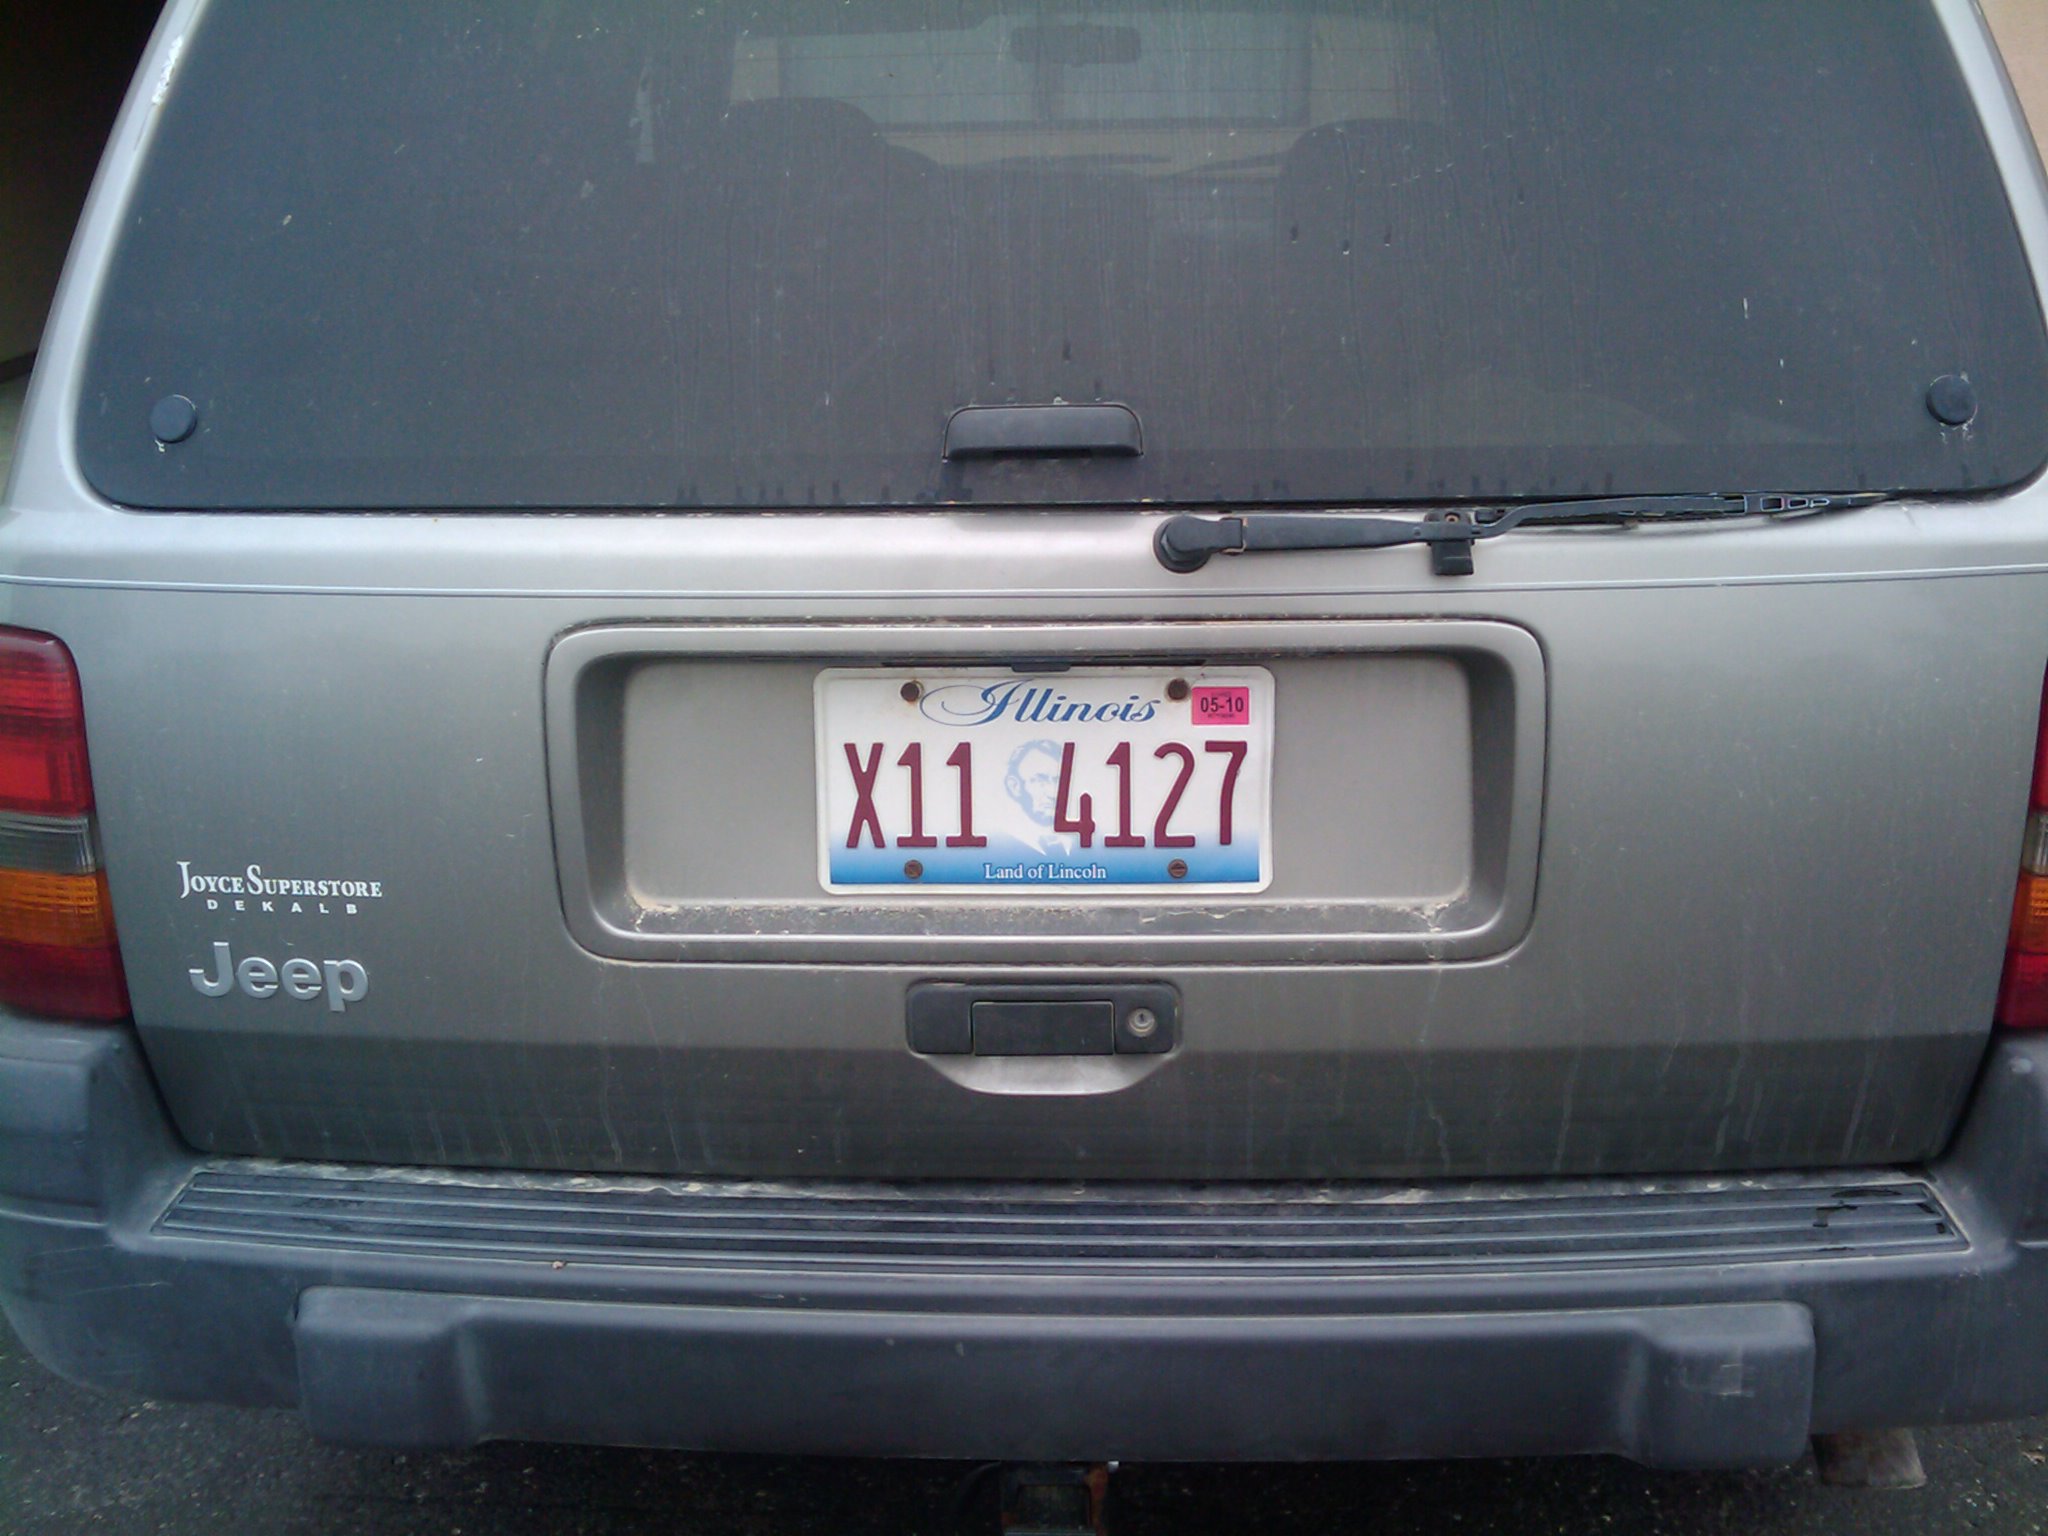 A car running Xorg for its windows.